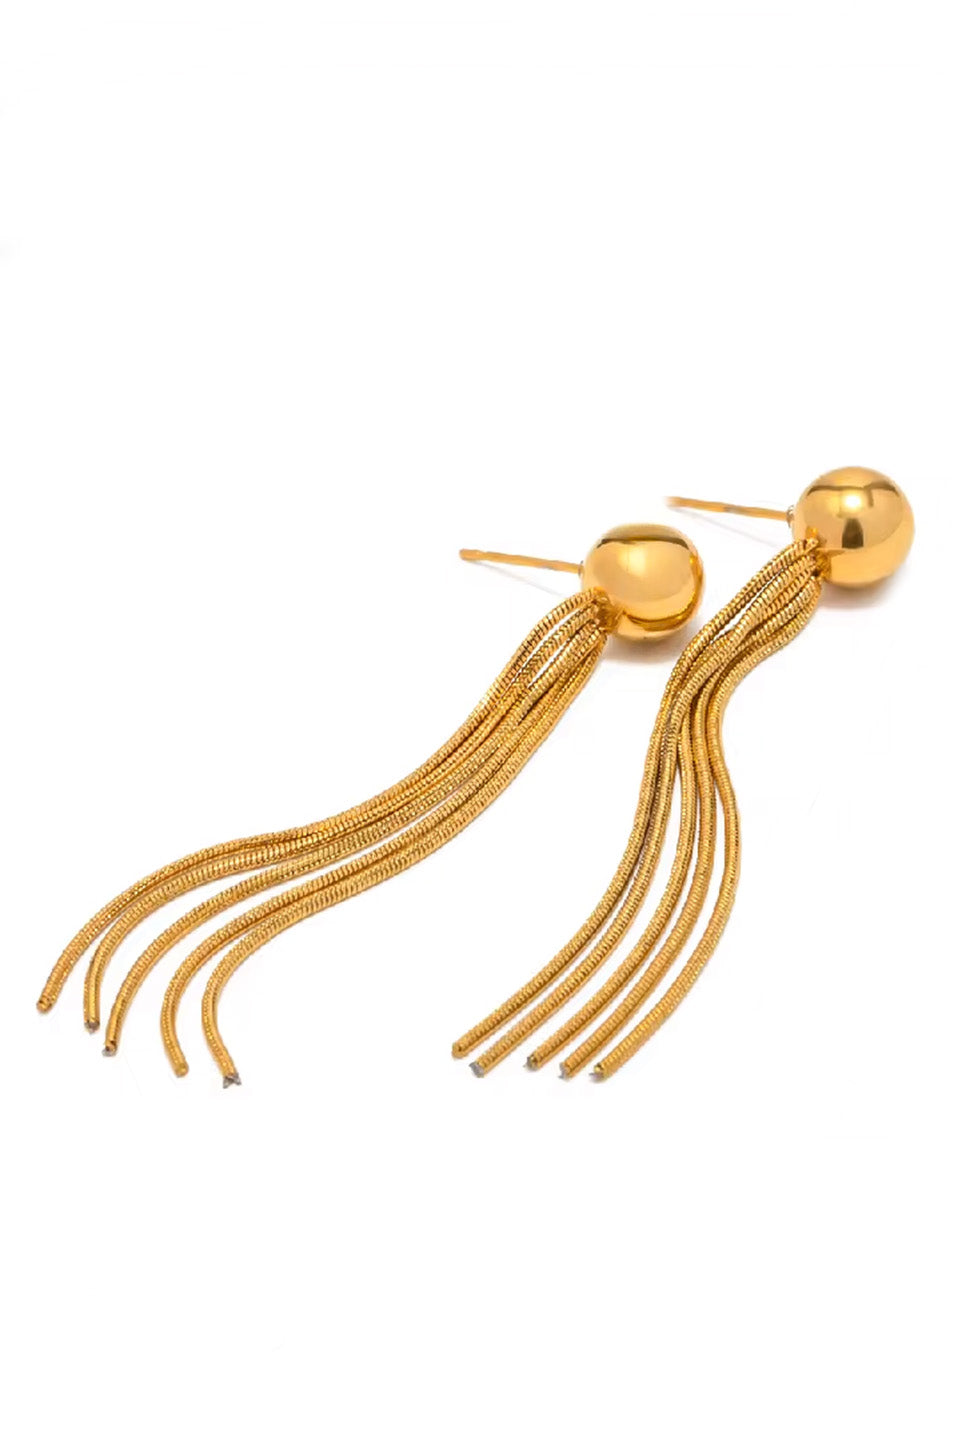 Pearl of the West - Jessie Earrings - 18K Gold Plated Stainless